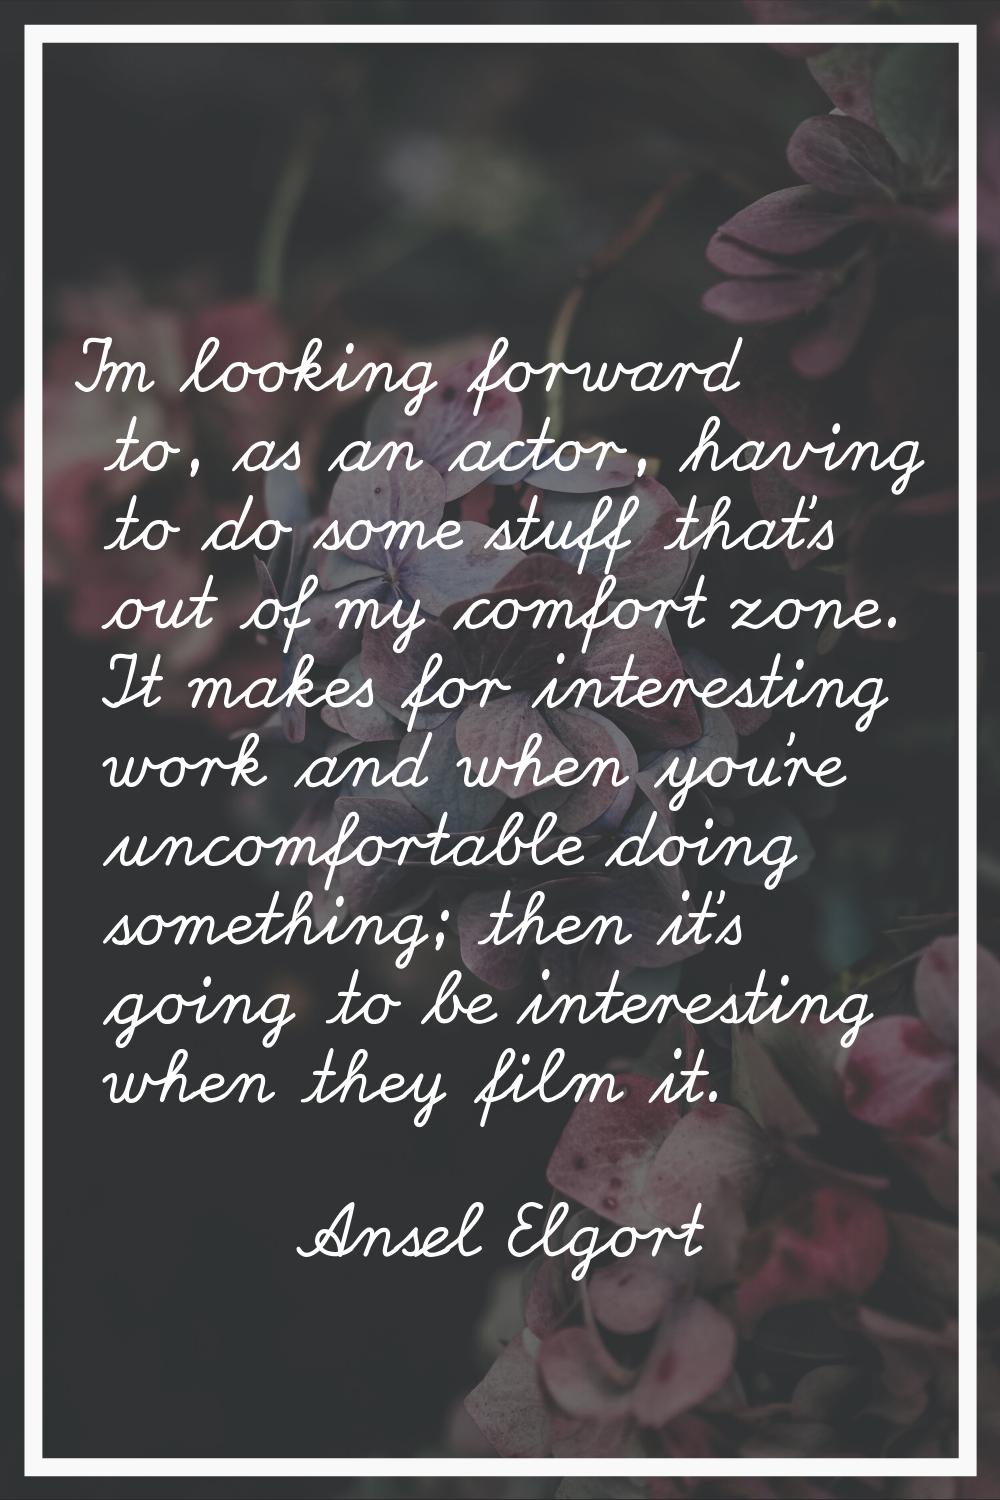 I'm looking forward to, as an actor, having to do some stuff that's out of my comfort zone. It make